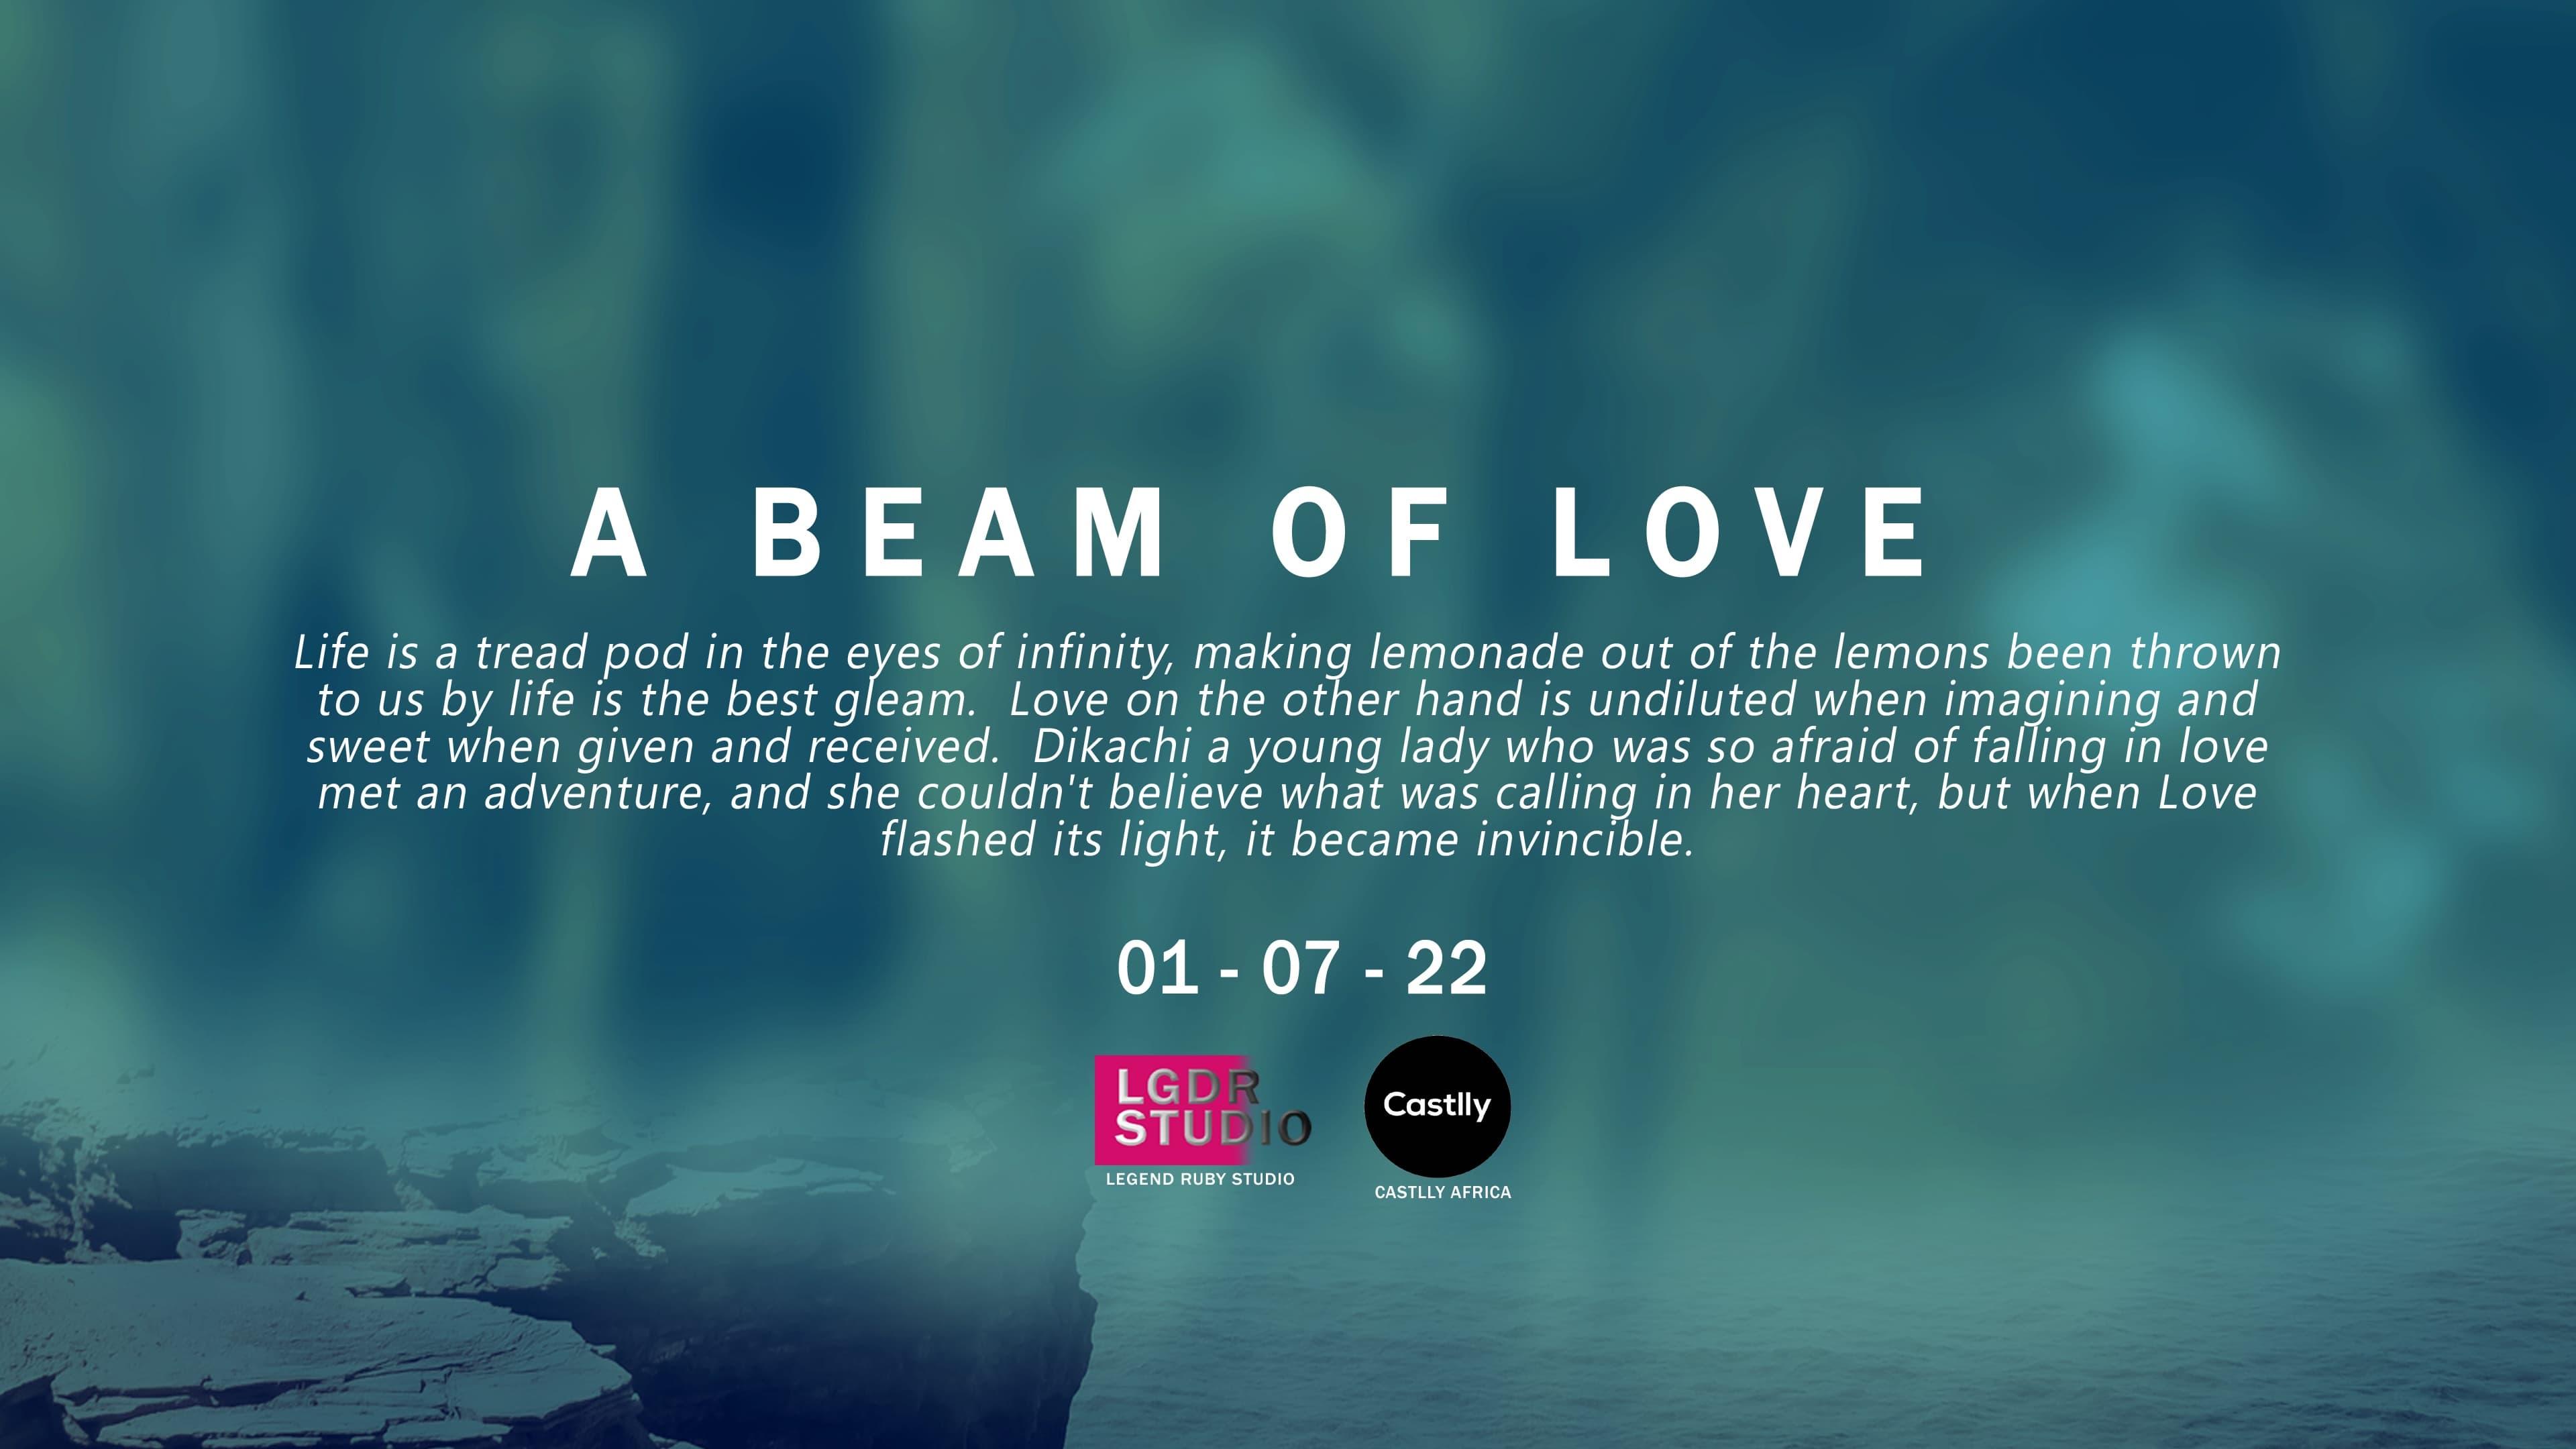 A Beam Of Love backdrop